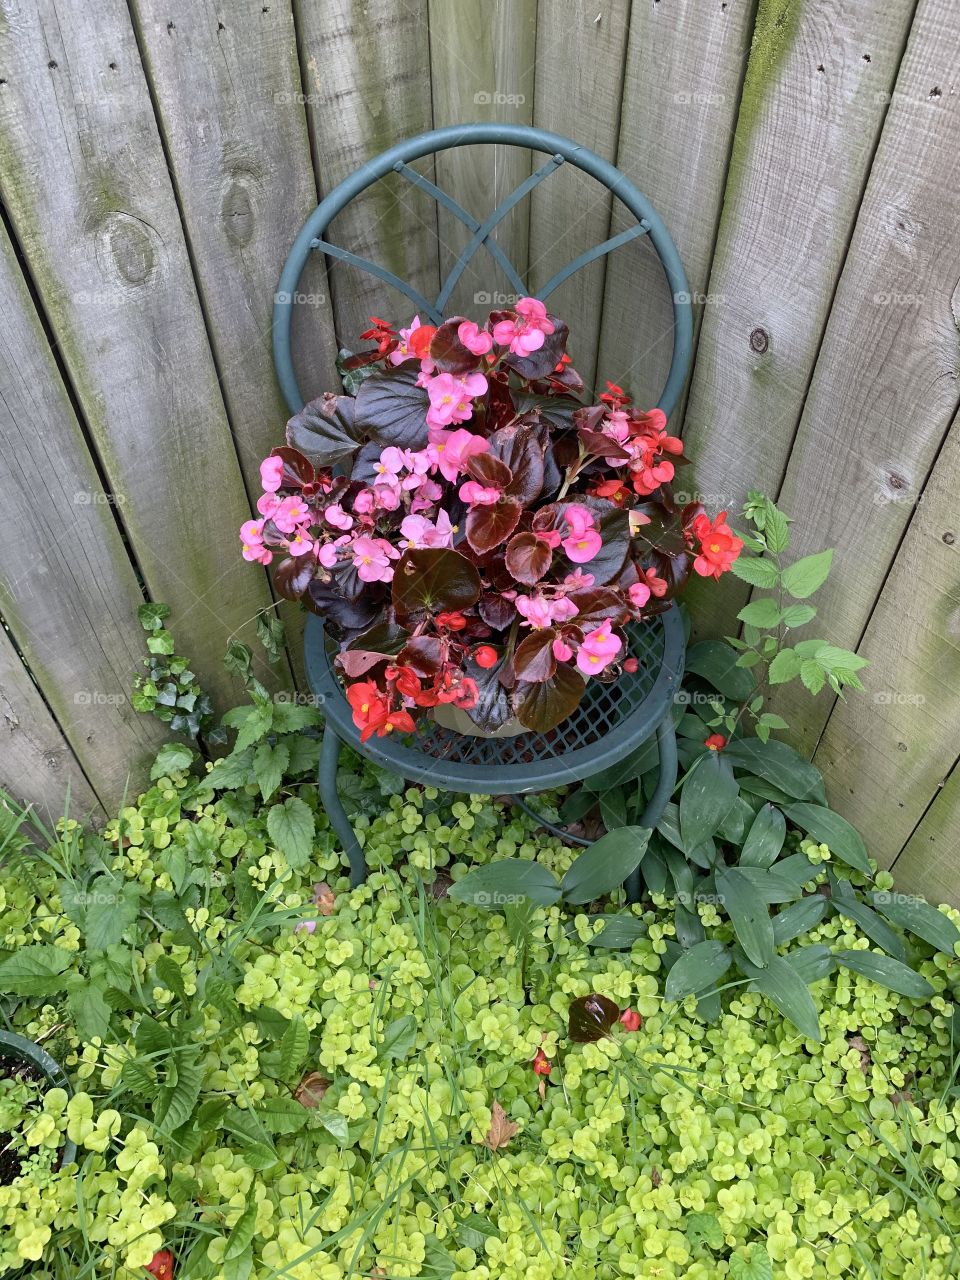 Red and pink begonias in wooden fence corner growing with creeping Jenny plant